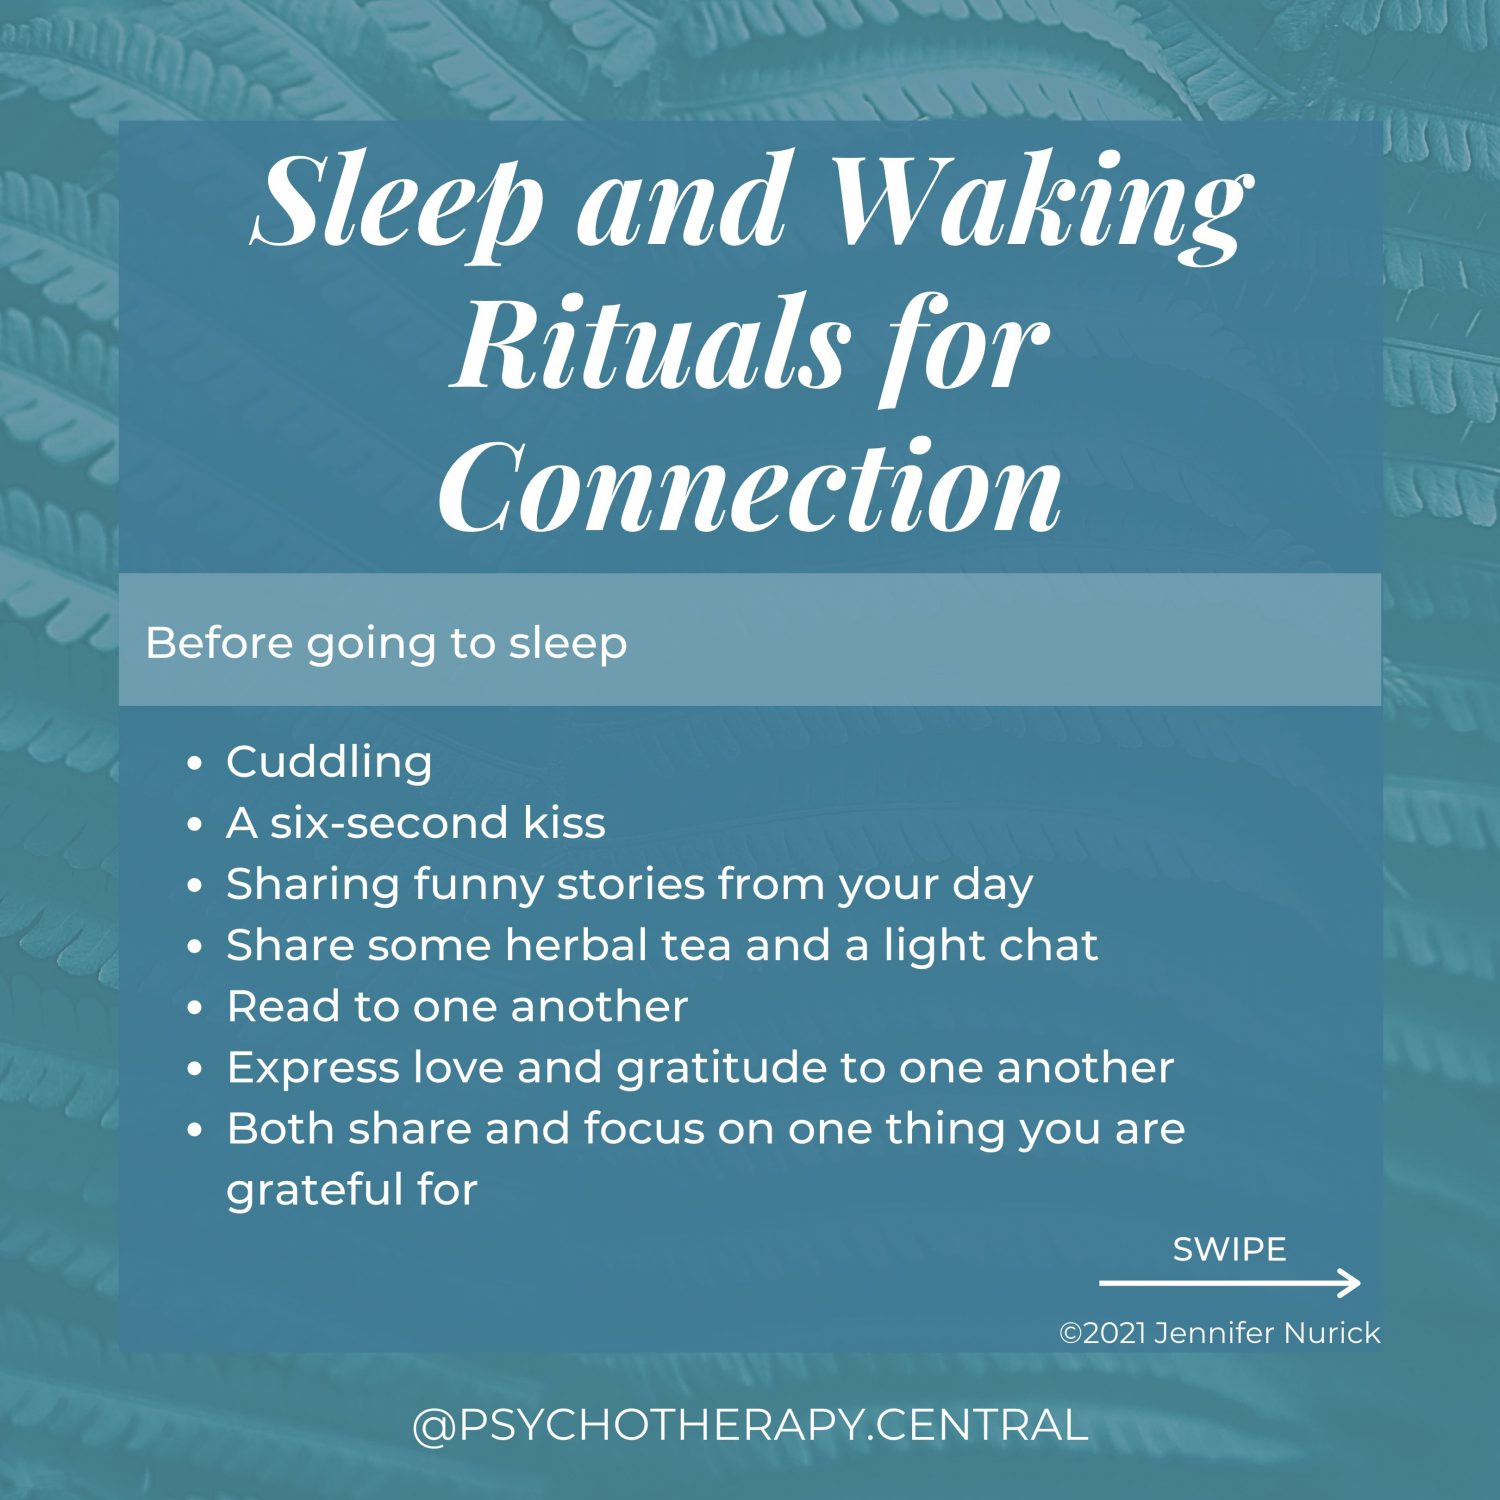 Sleep and Waking Rituals for Connection Before going to sleep Cuddling A six-second kiss Sharing funny stories from your day Share some herbal tea and a light chat Read to one another Express love and gratitude to one another Both share and focus on one thing you are grateful for Waking Rituals Cuddle for a few minutes Ask how the other person slept Make and eat breakfast together Tell your partner something you love about them Meditate together for 15 minutes Exercise together